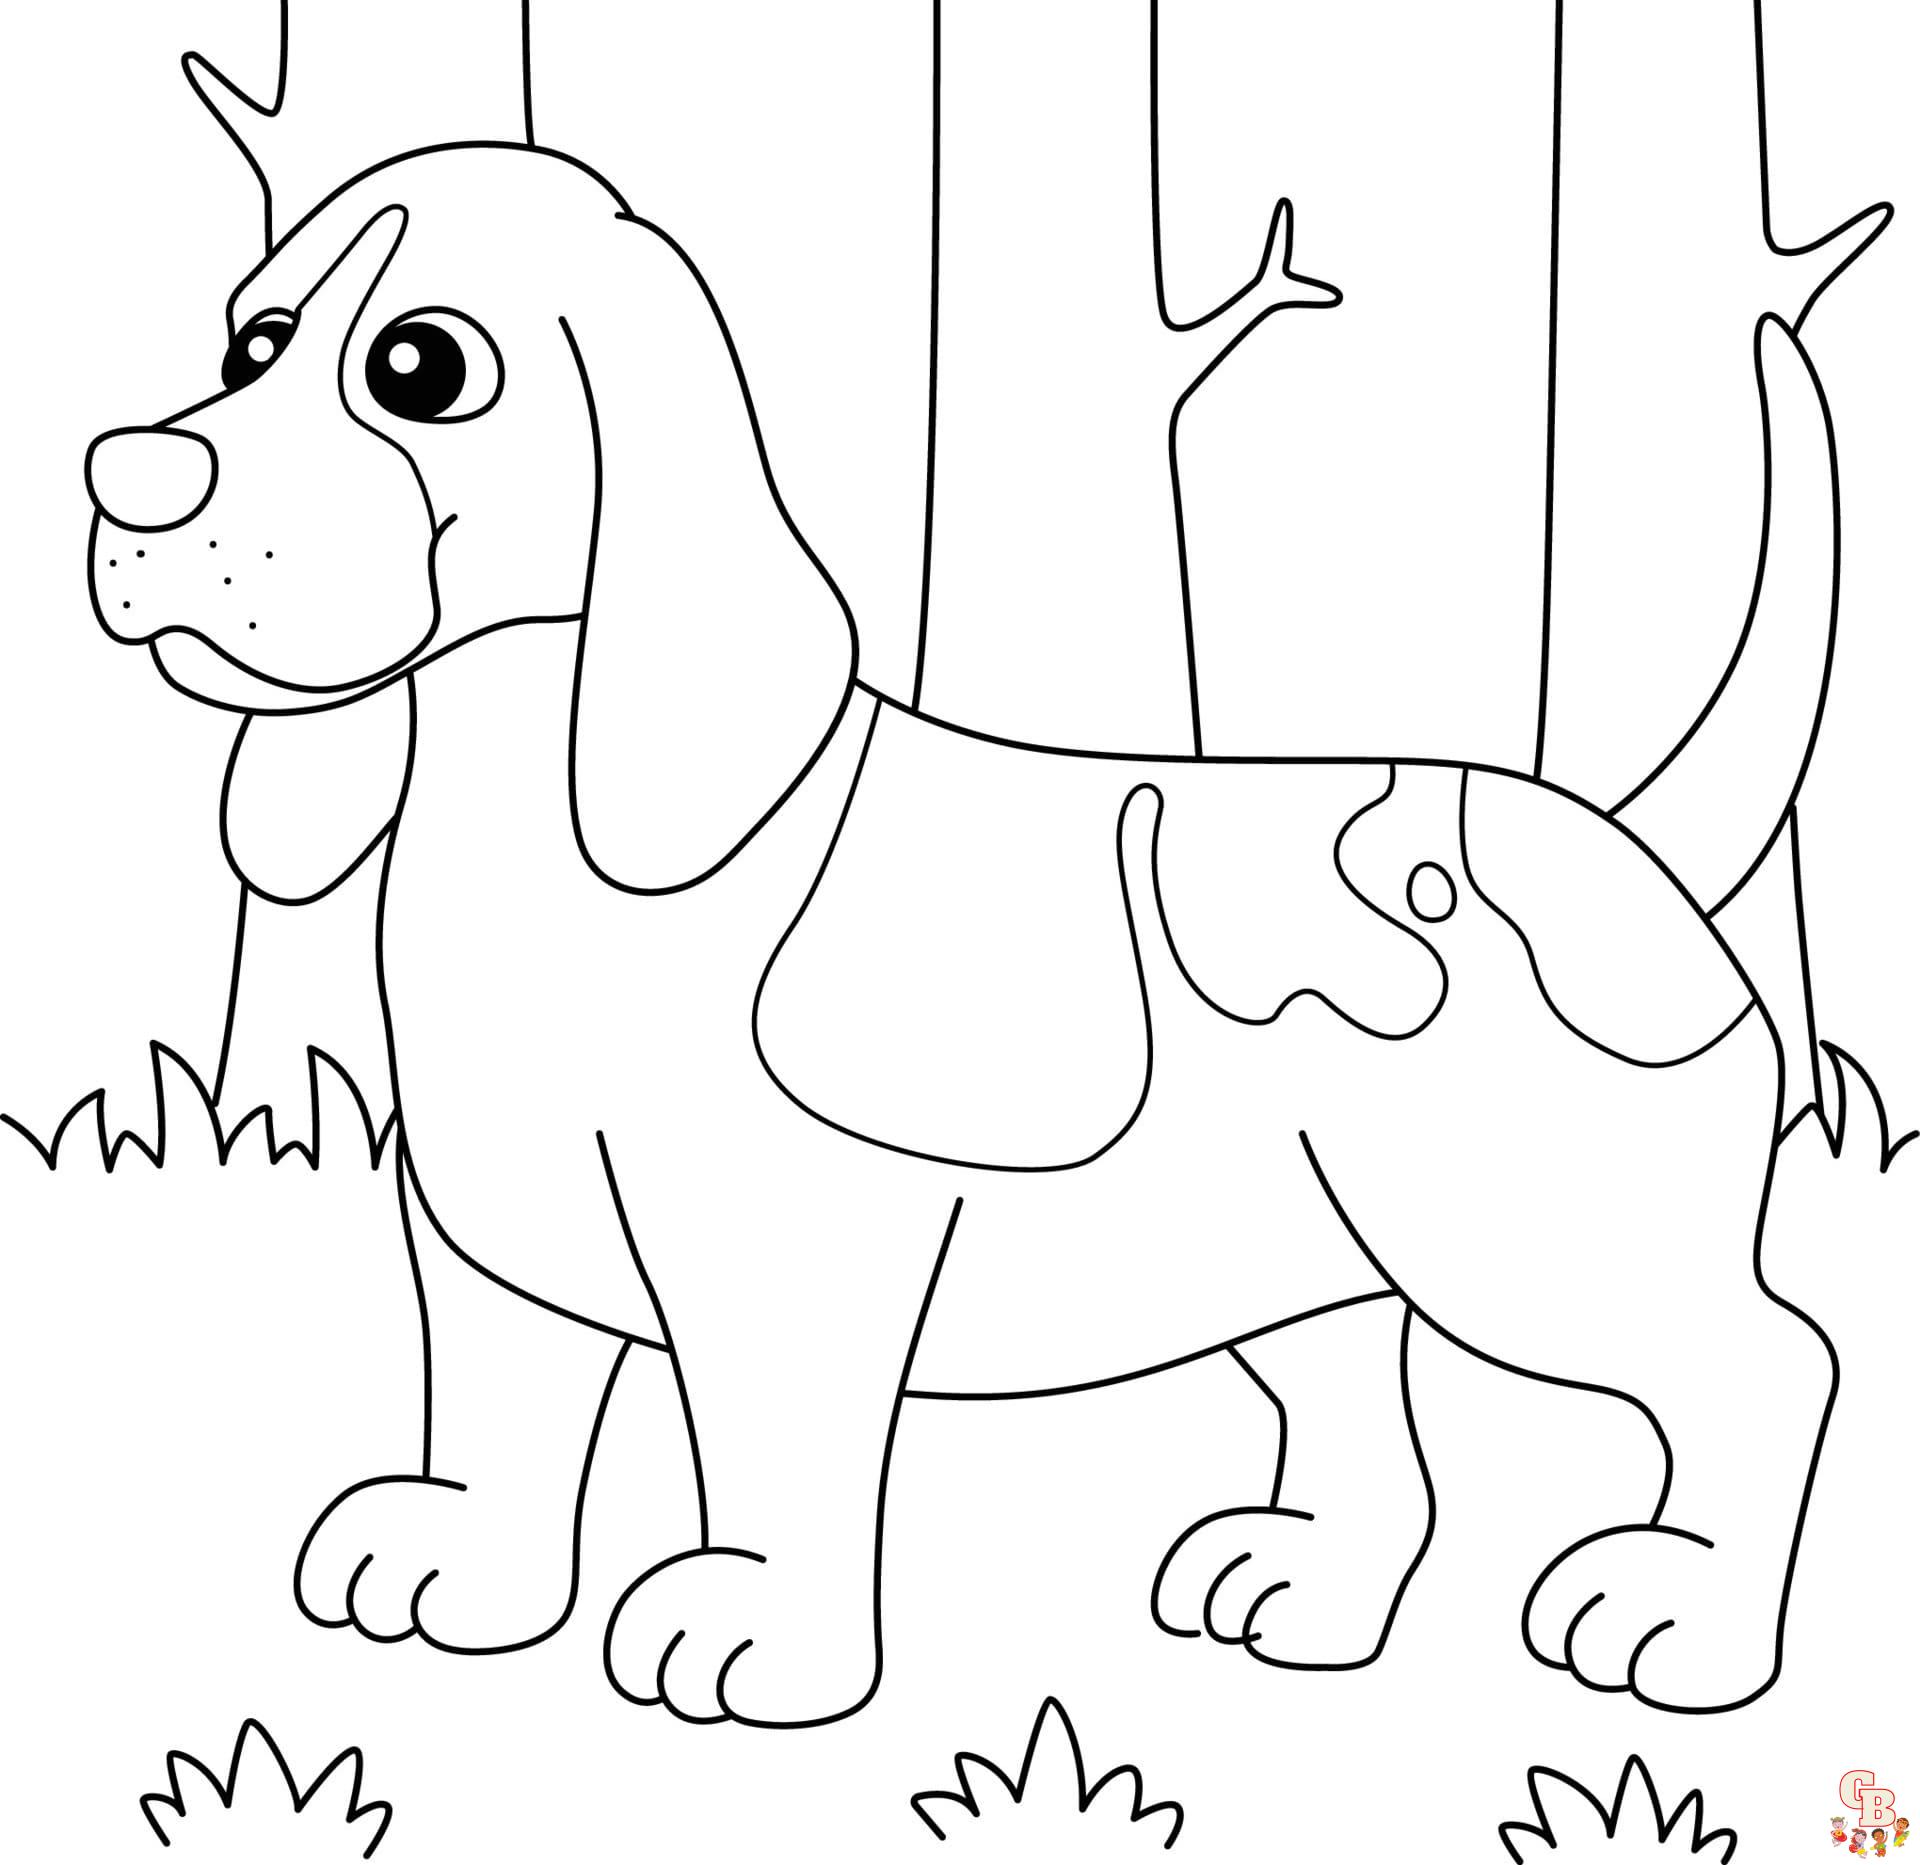 Basset Hound coloring pages free